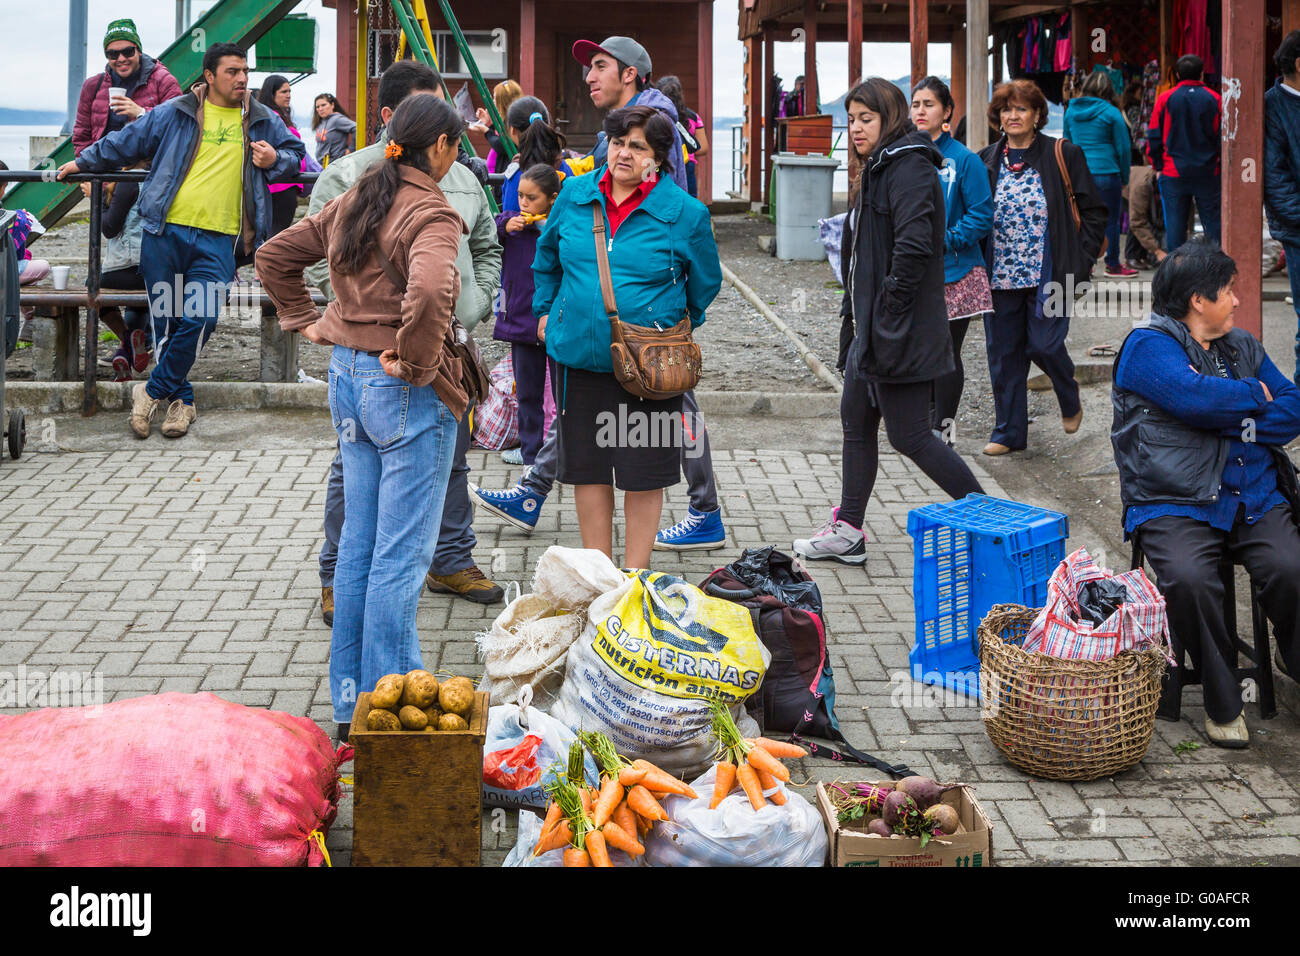 An outdoor market in the village of Achao, Chile, South America. Stock Photo